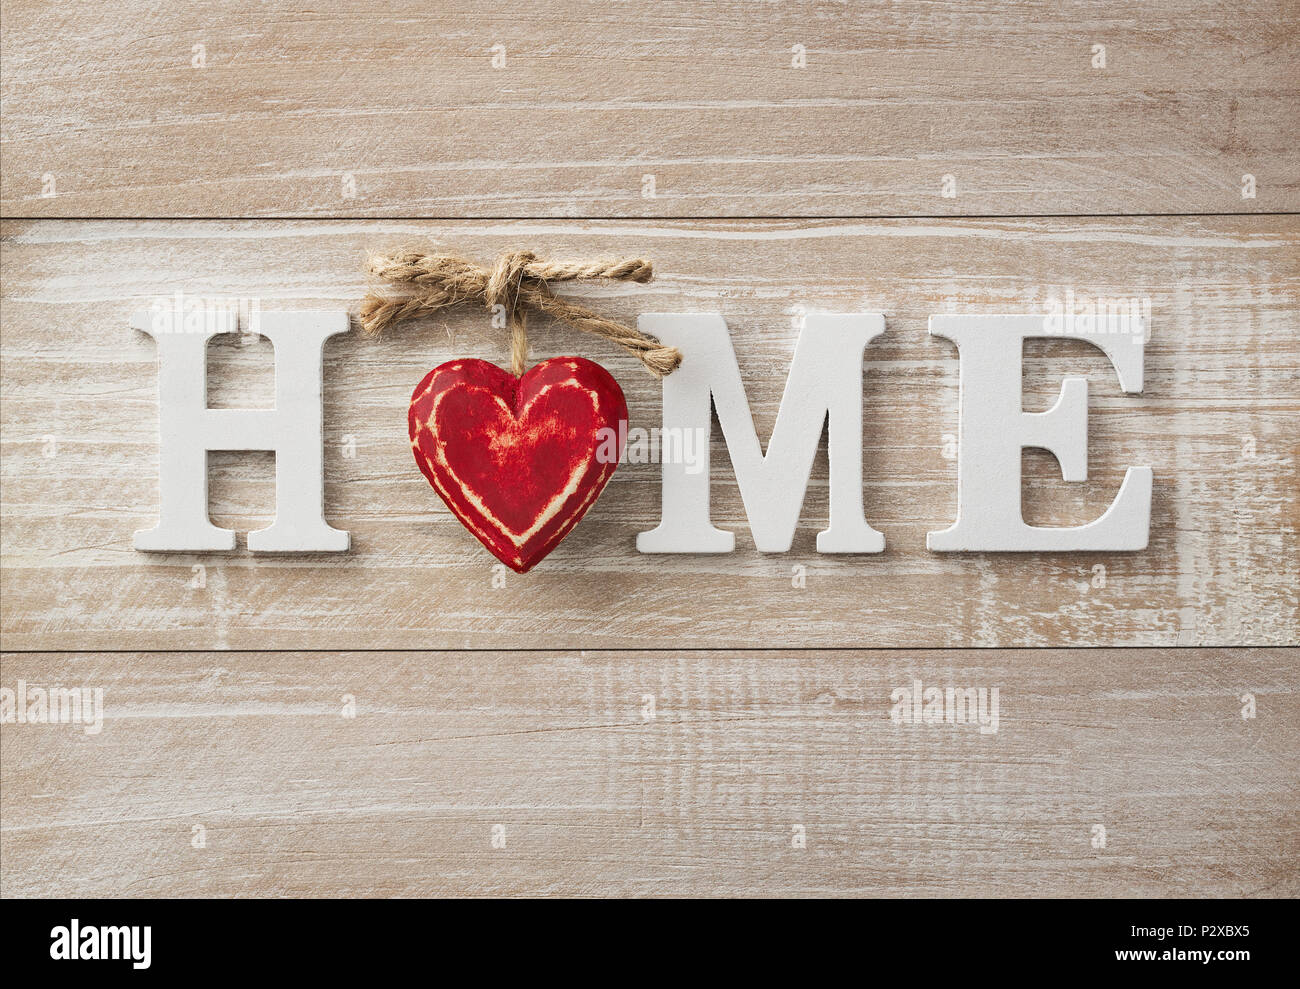 Home sweet home, wooden text on vintage board background with copy space Stock Photo